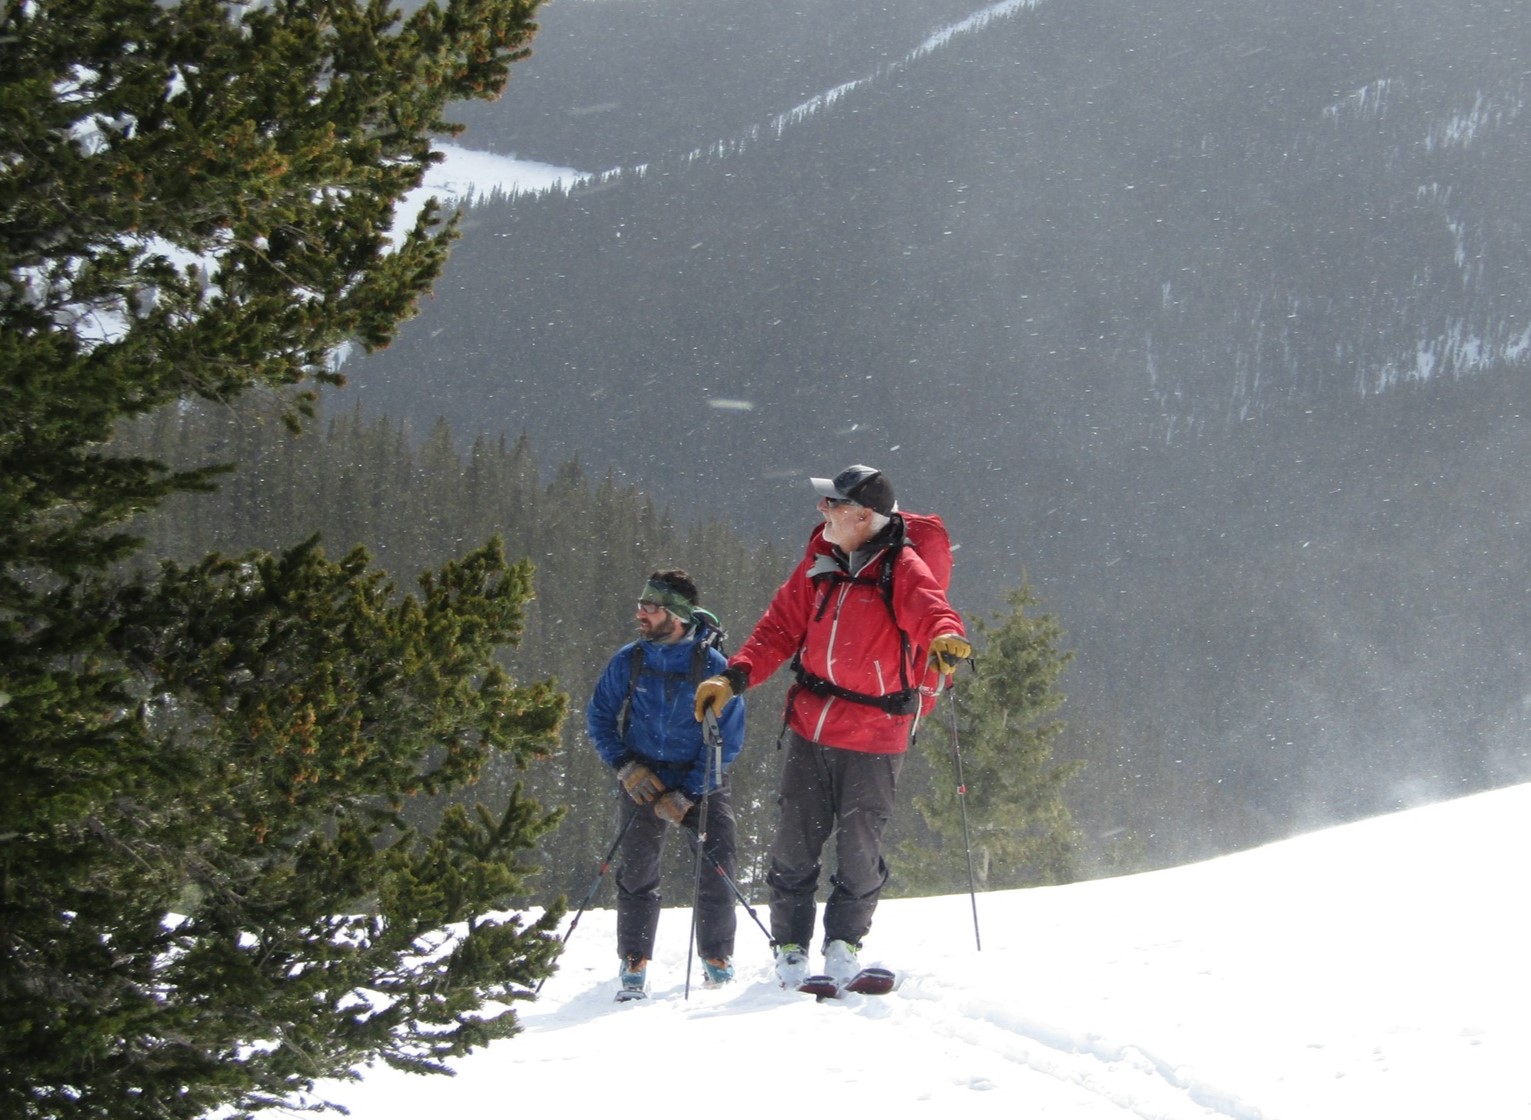 Two skiers in the backcountry skinning